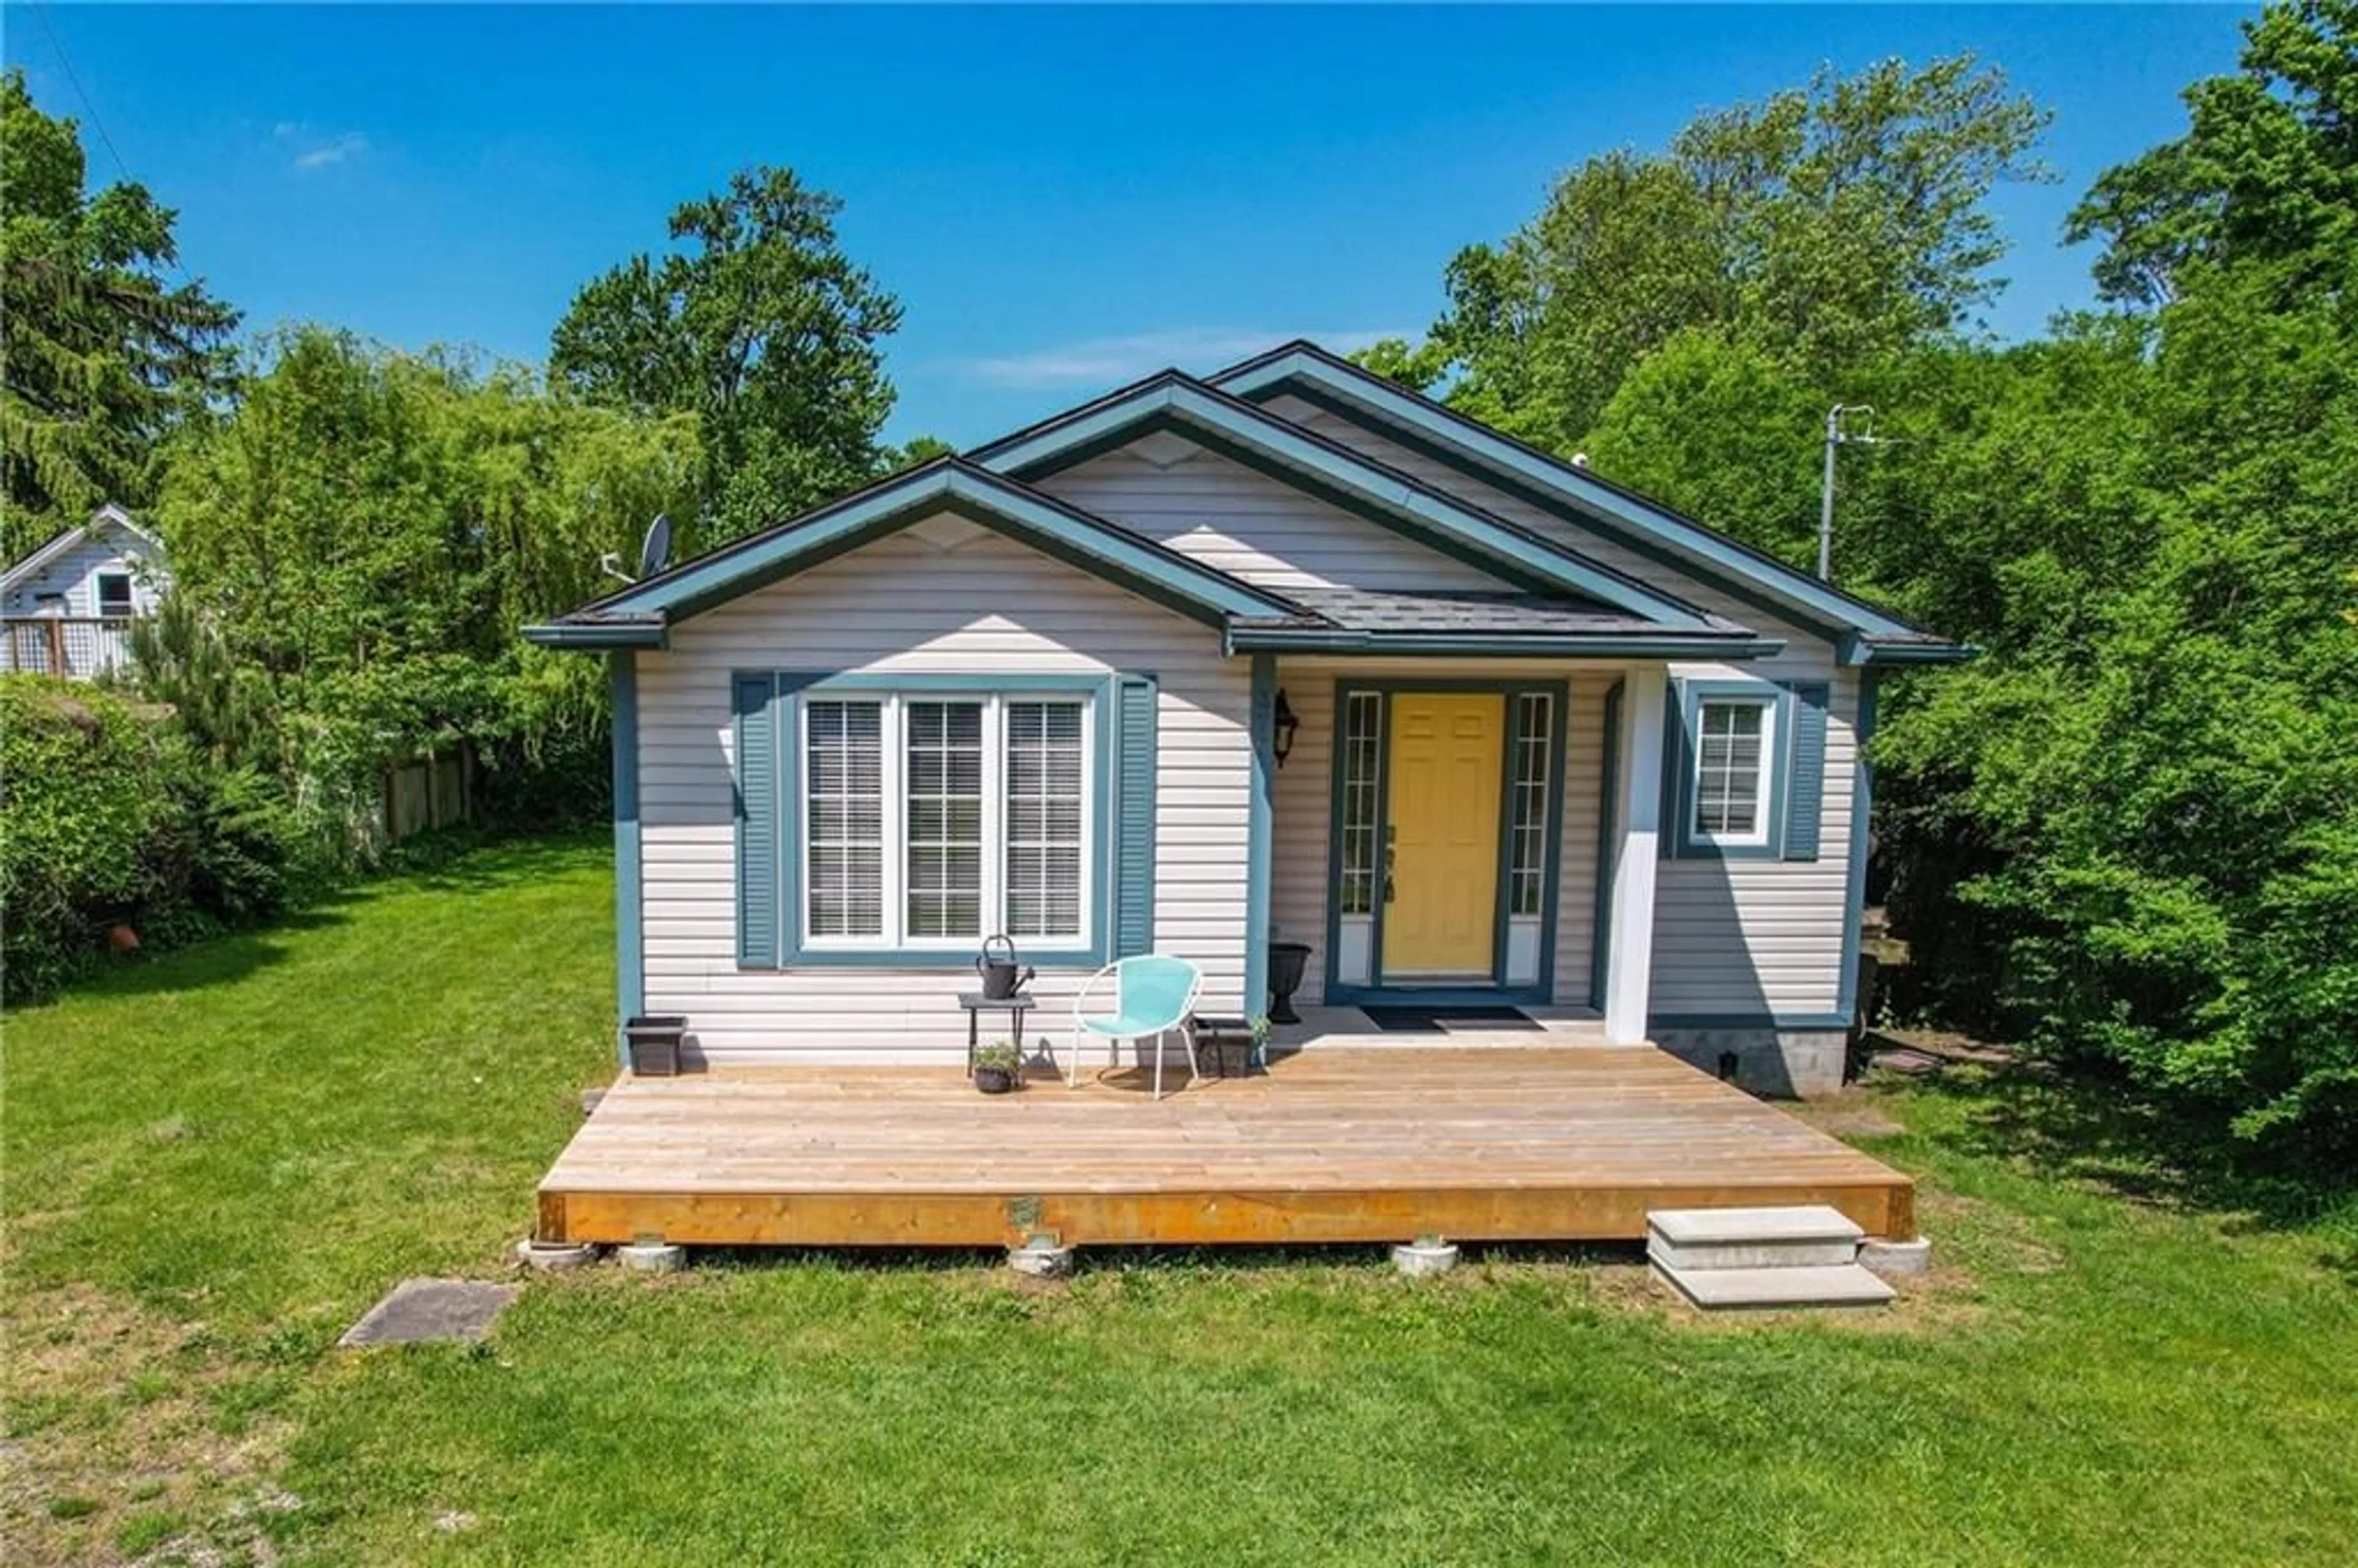 Cottage for 375 CHERRYWOOD Ave, Crystal Beach Ontario L0S 1B0